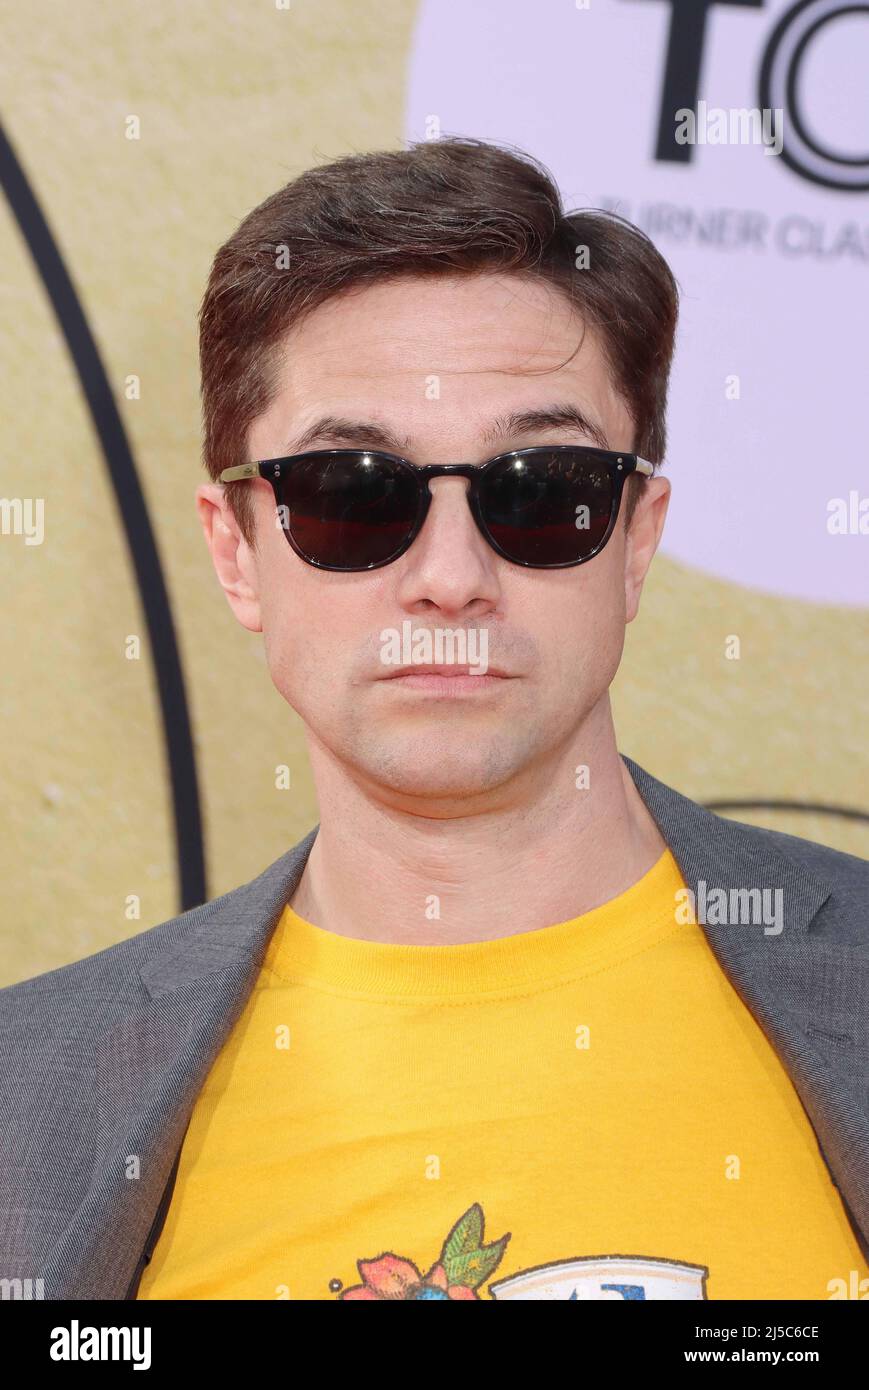 Los Angeles, USA. 21st Apr, 2022. Topher Grace 2022/04/21 The 40th Anniversary Screening of “E.T. the Extra-Terrestrial” held at TCL Chinese Theatre in Hollywood, CA, Credit: Cronos/Alamy Live News Stock Photo